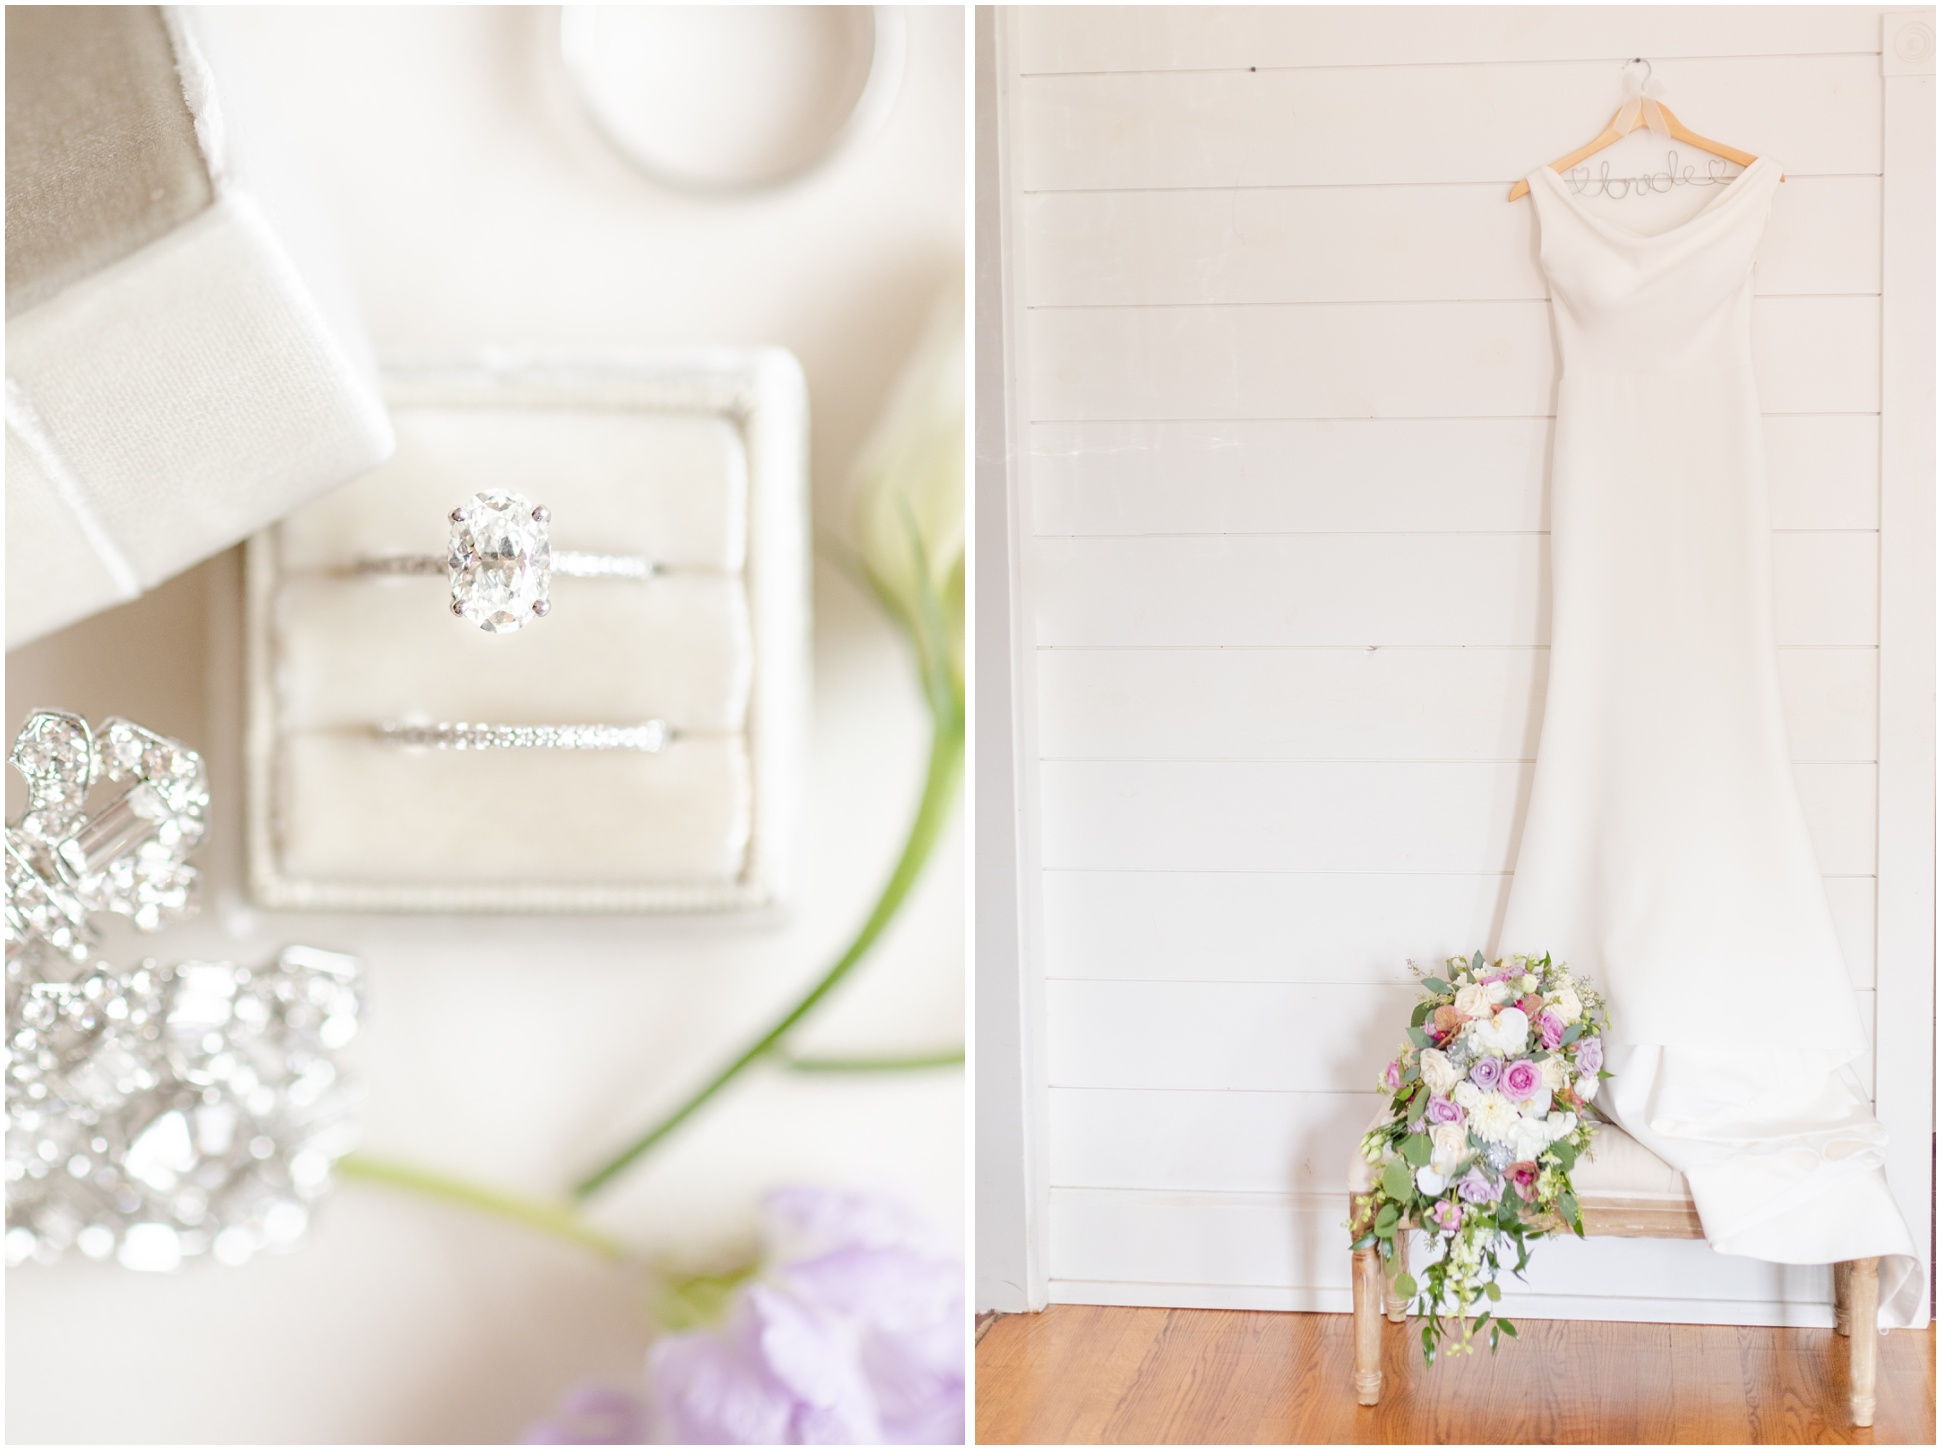 Left: Close up of weddings rings in a Mrs. Box, Right: Wedding dress and bouquet